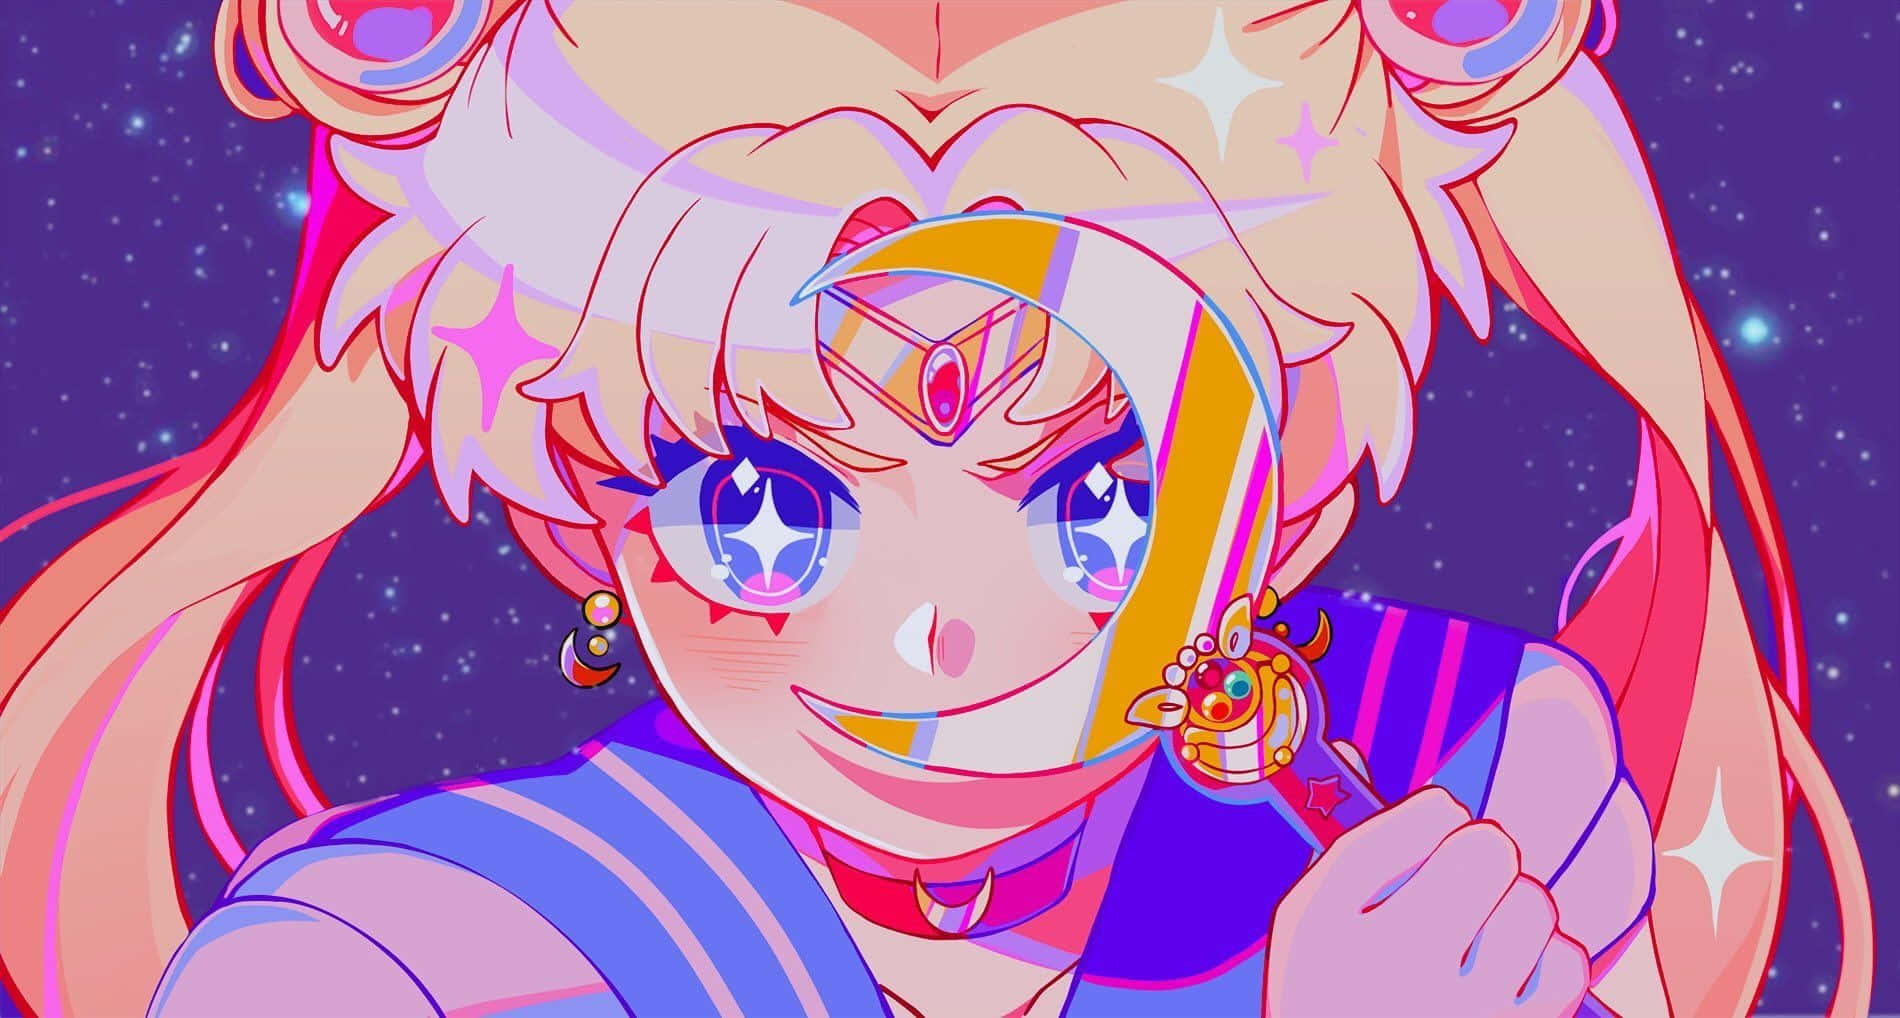 100+] Aesthetic Sailor Moon Wallpapers